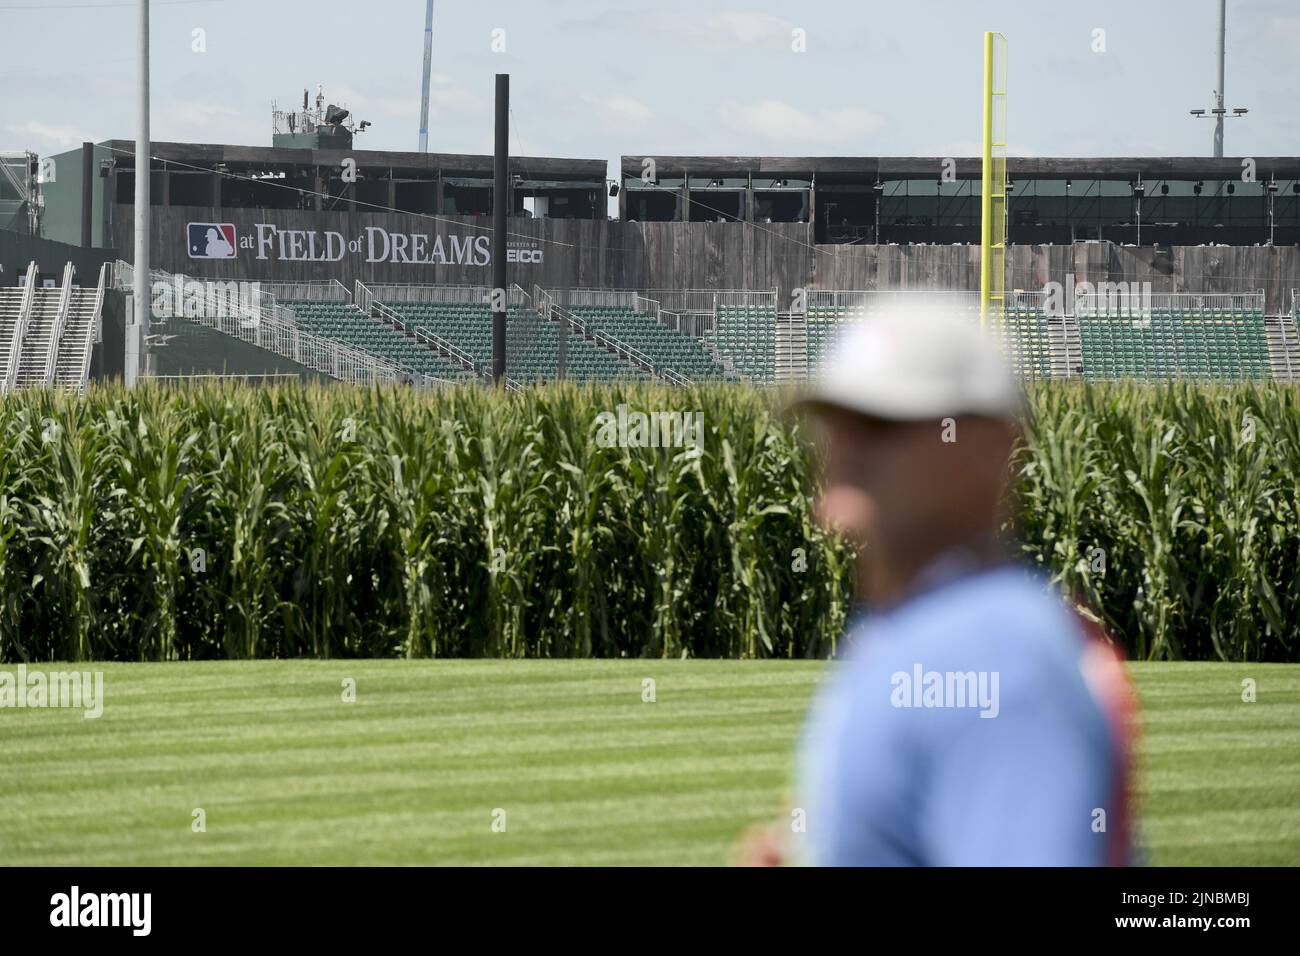 Dyersville, United States. 10th Aug, 2022. Major League Baseball prepares  for the second annual Field of Dreams game between the Cincinnati Reds and  Chicago Cubs in Dyersville, Iowa, Wednesday, August 10, 2022.